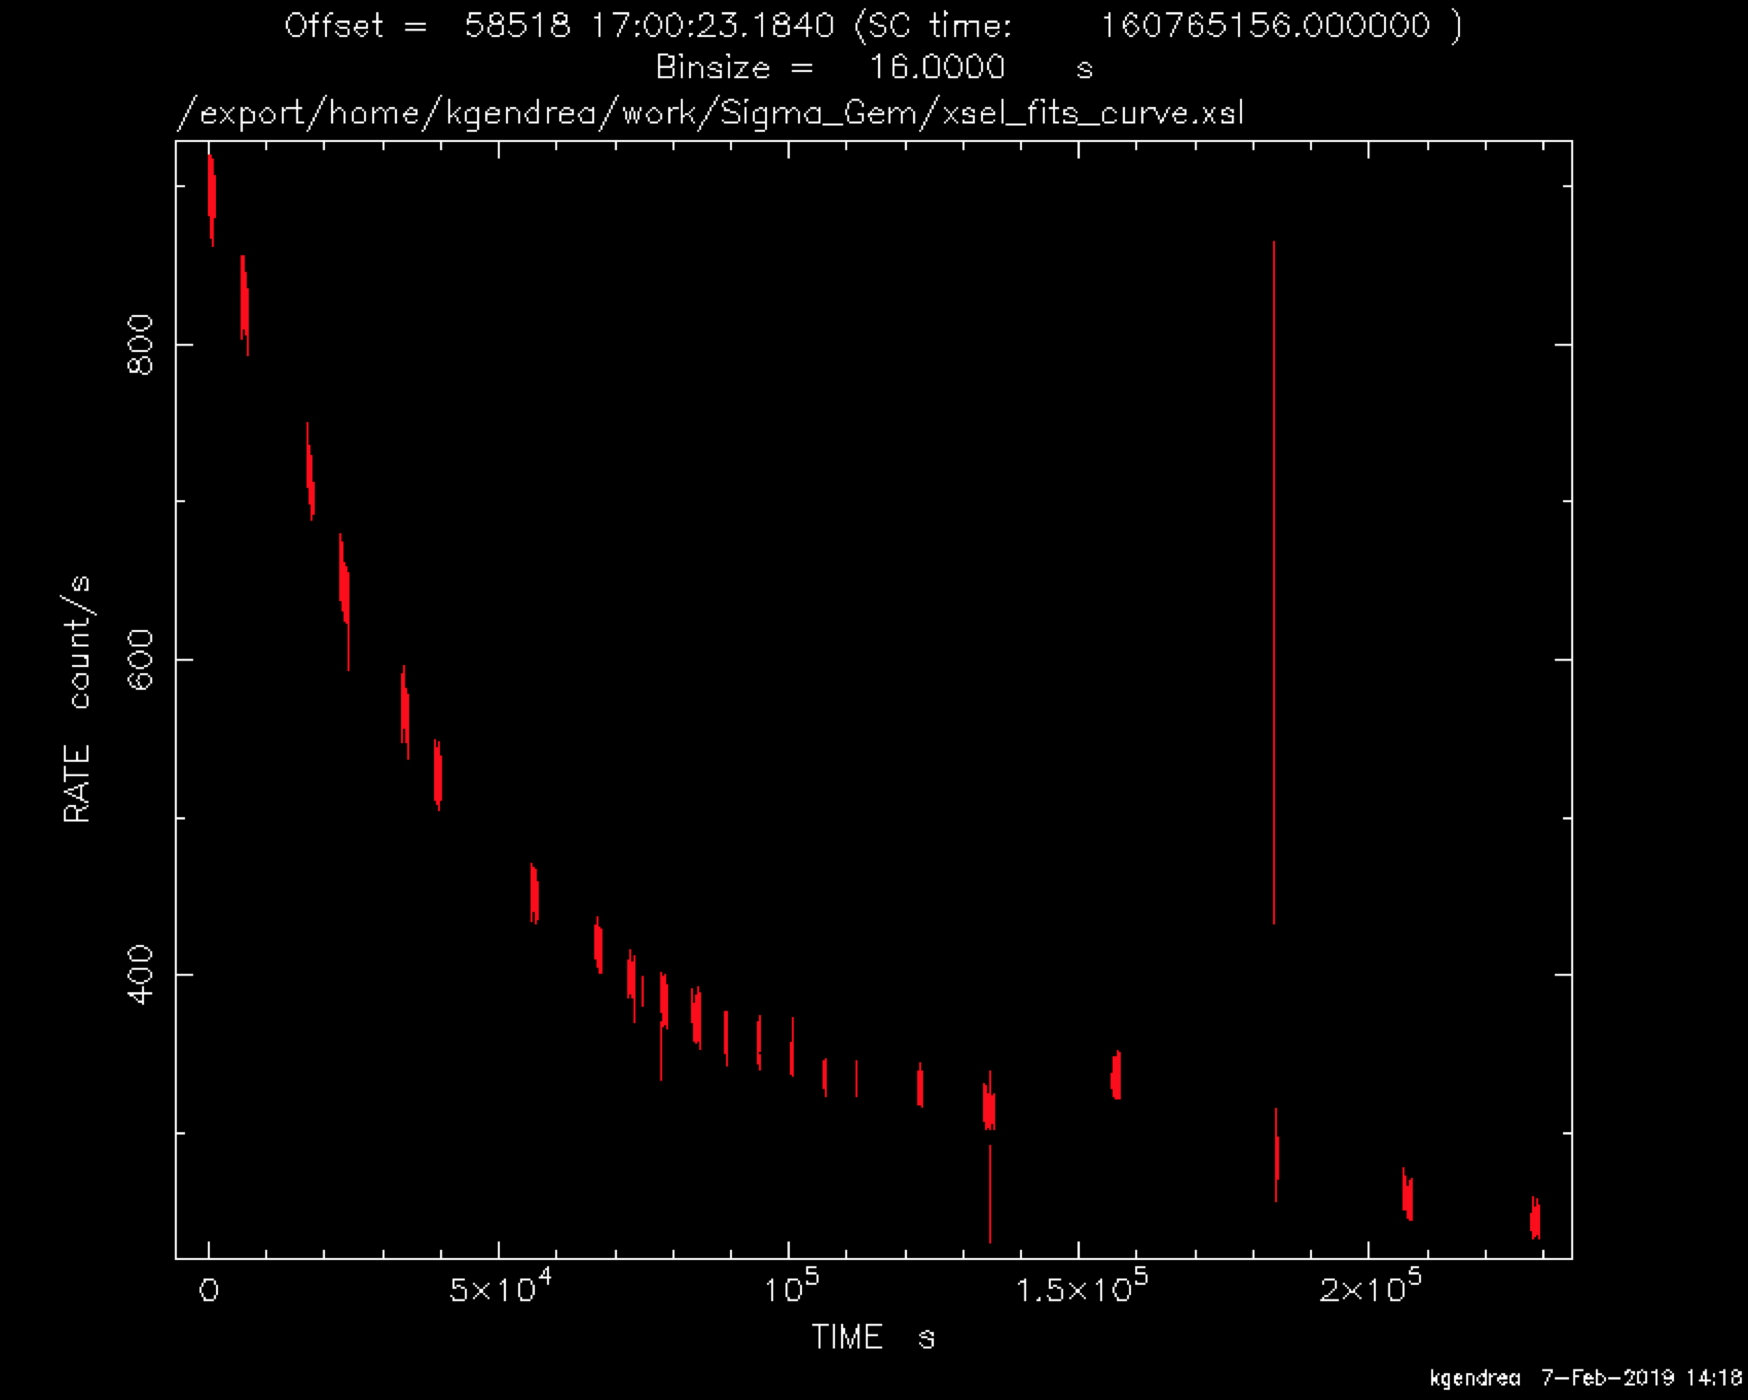 Rapid decay in an X-ray flare detected from the Geminorum binary star system